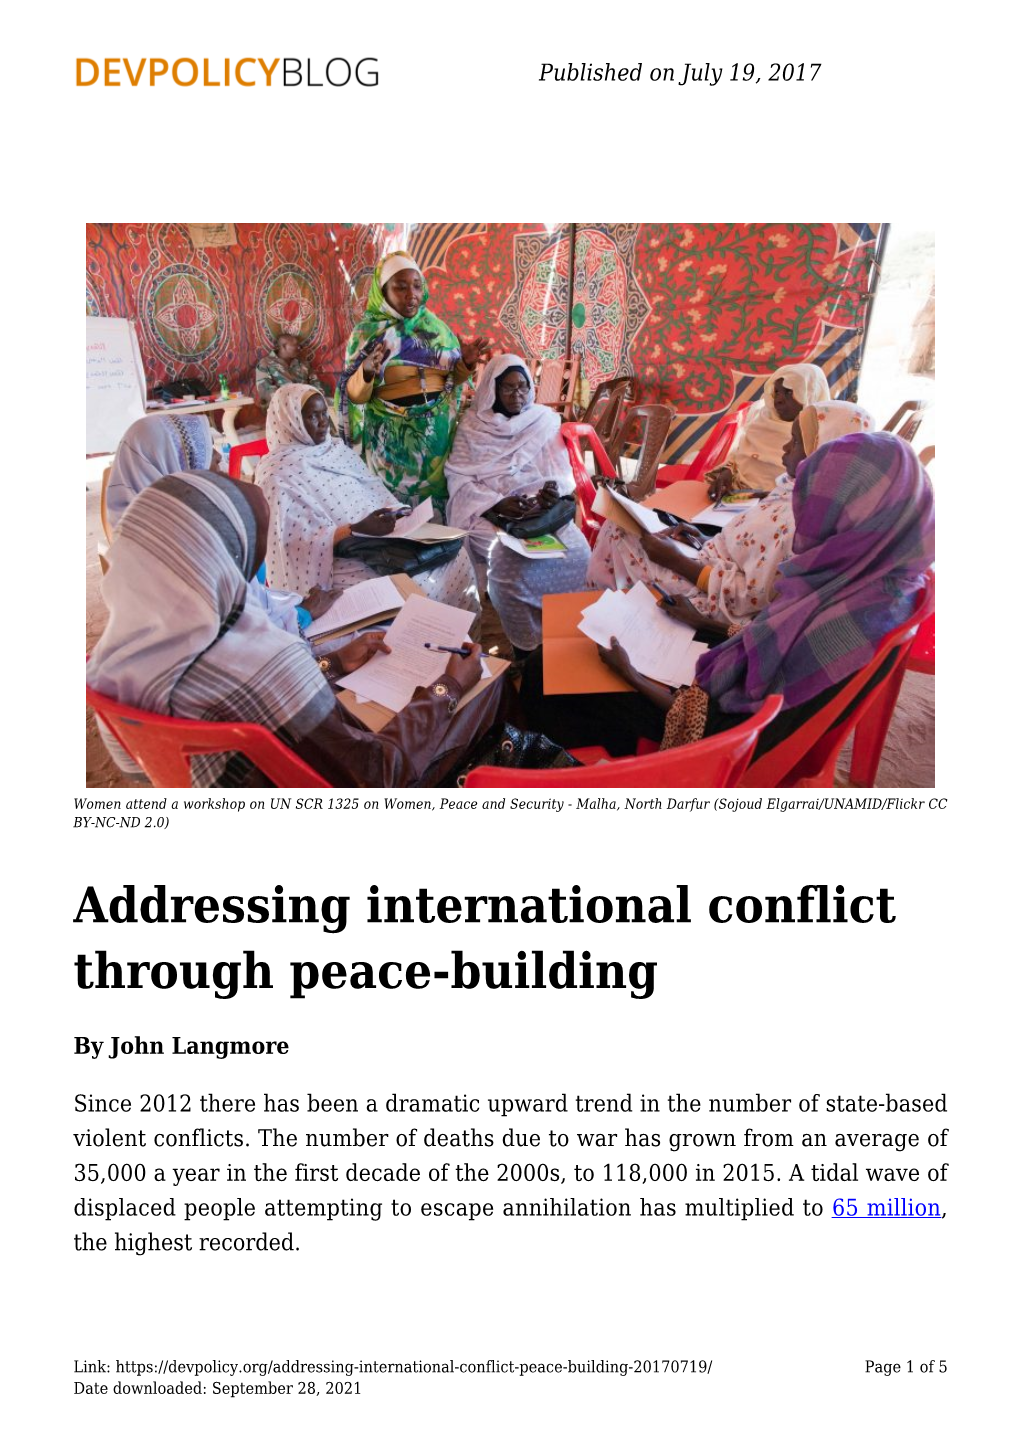 Addressing International Conflict Through Peace-Building